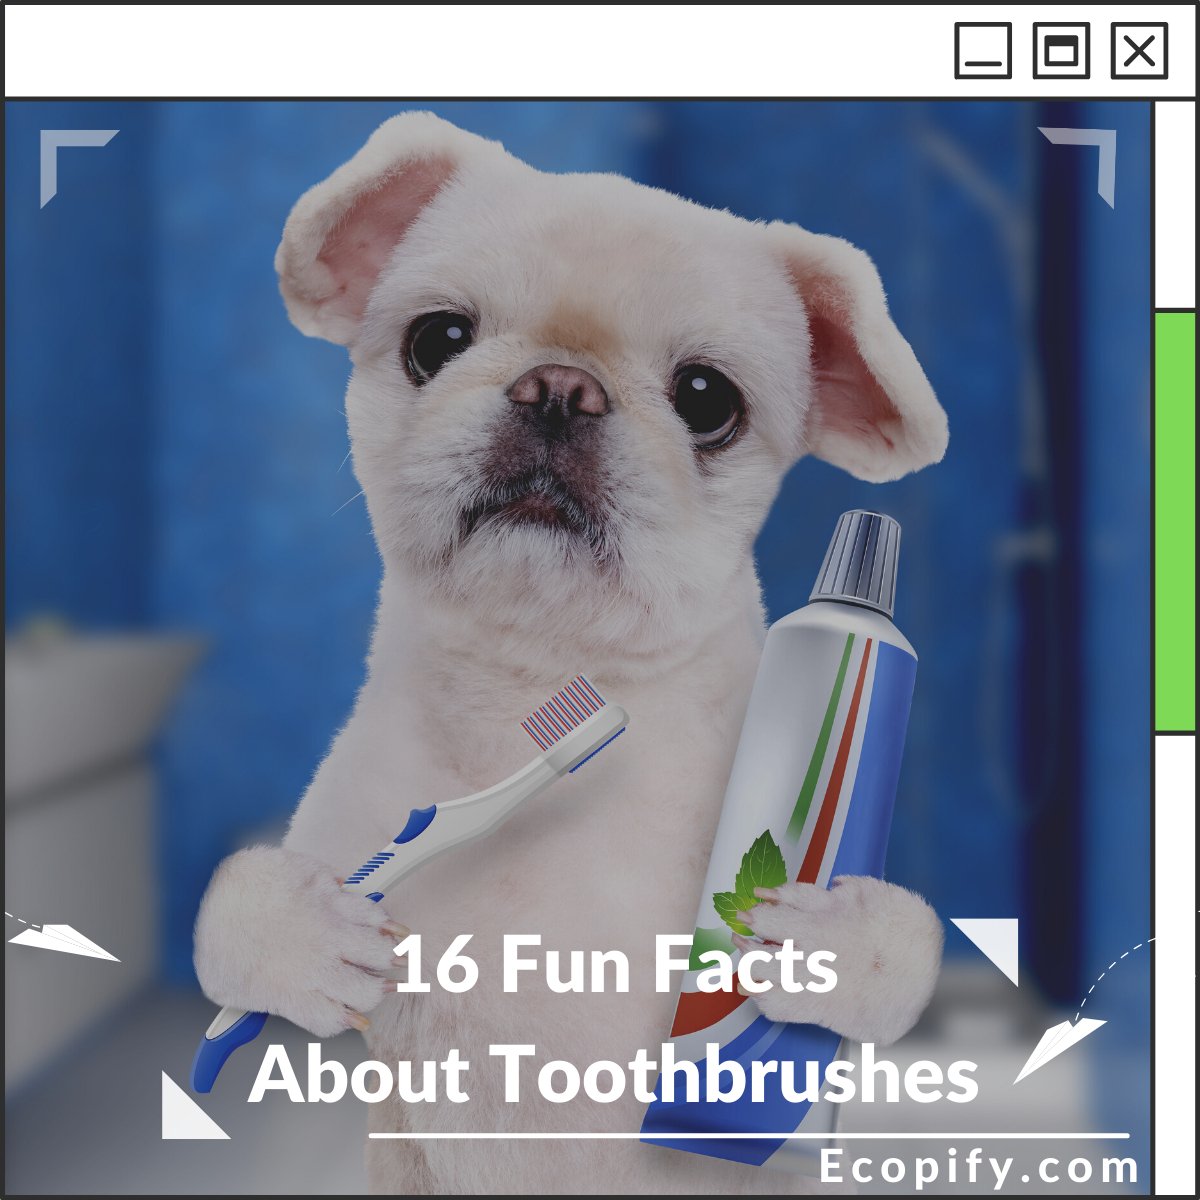 16 Fun Facts About Toothbrushes